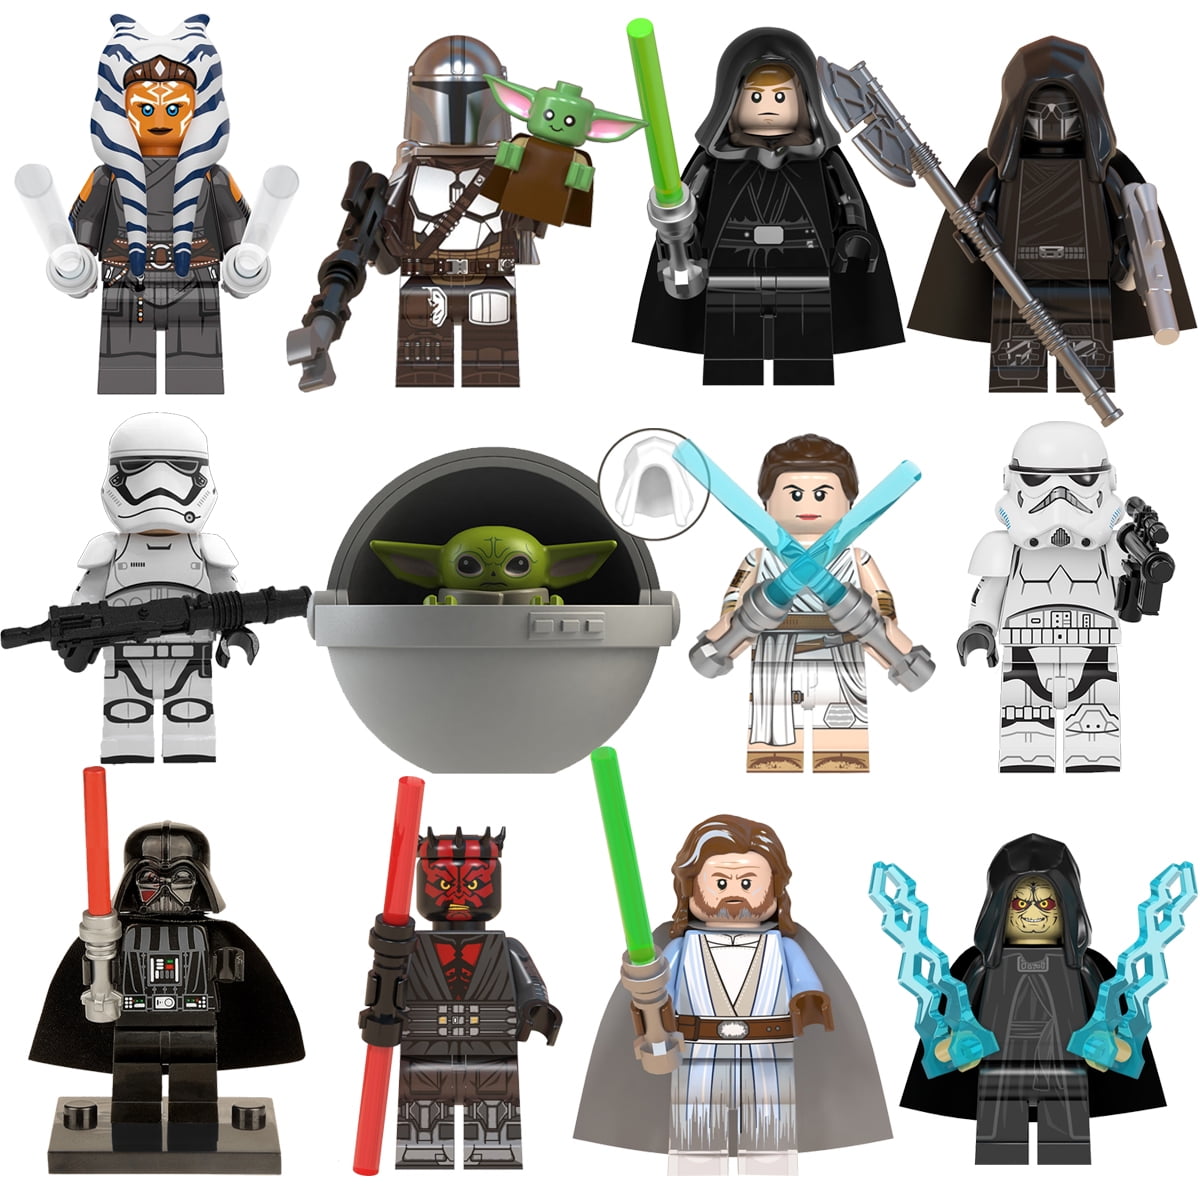 Pris peregrination automatisk 12 Pcs Star Wars Minifigures Pack Building Blocks Toys Set, 1.77 inch Space  Wars Stormtrooper Action Figures Clone Trooper Minifigures Building Kits  Gift for Kids and Fans - Walmart.com